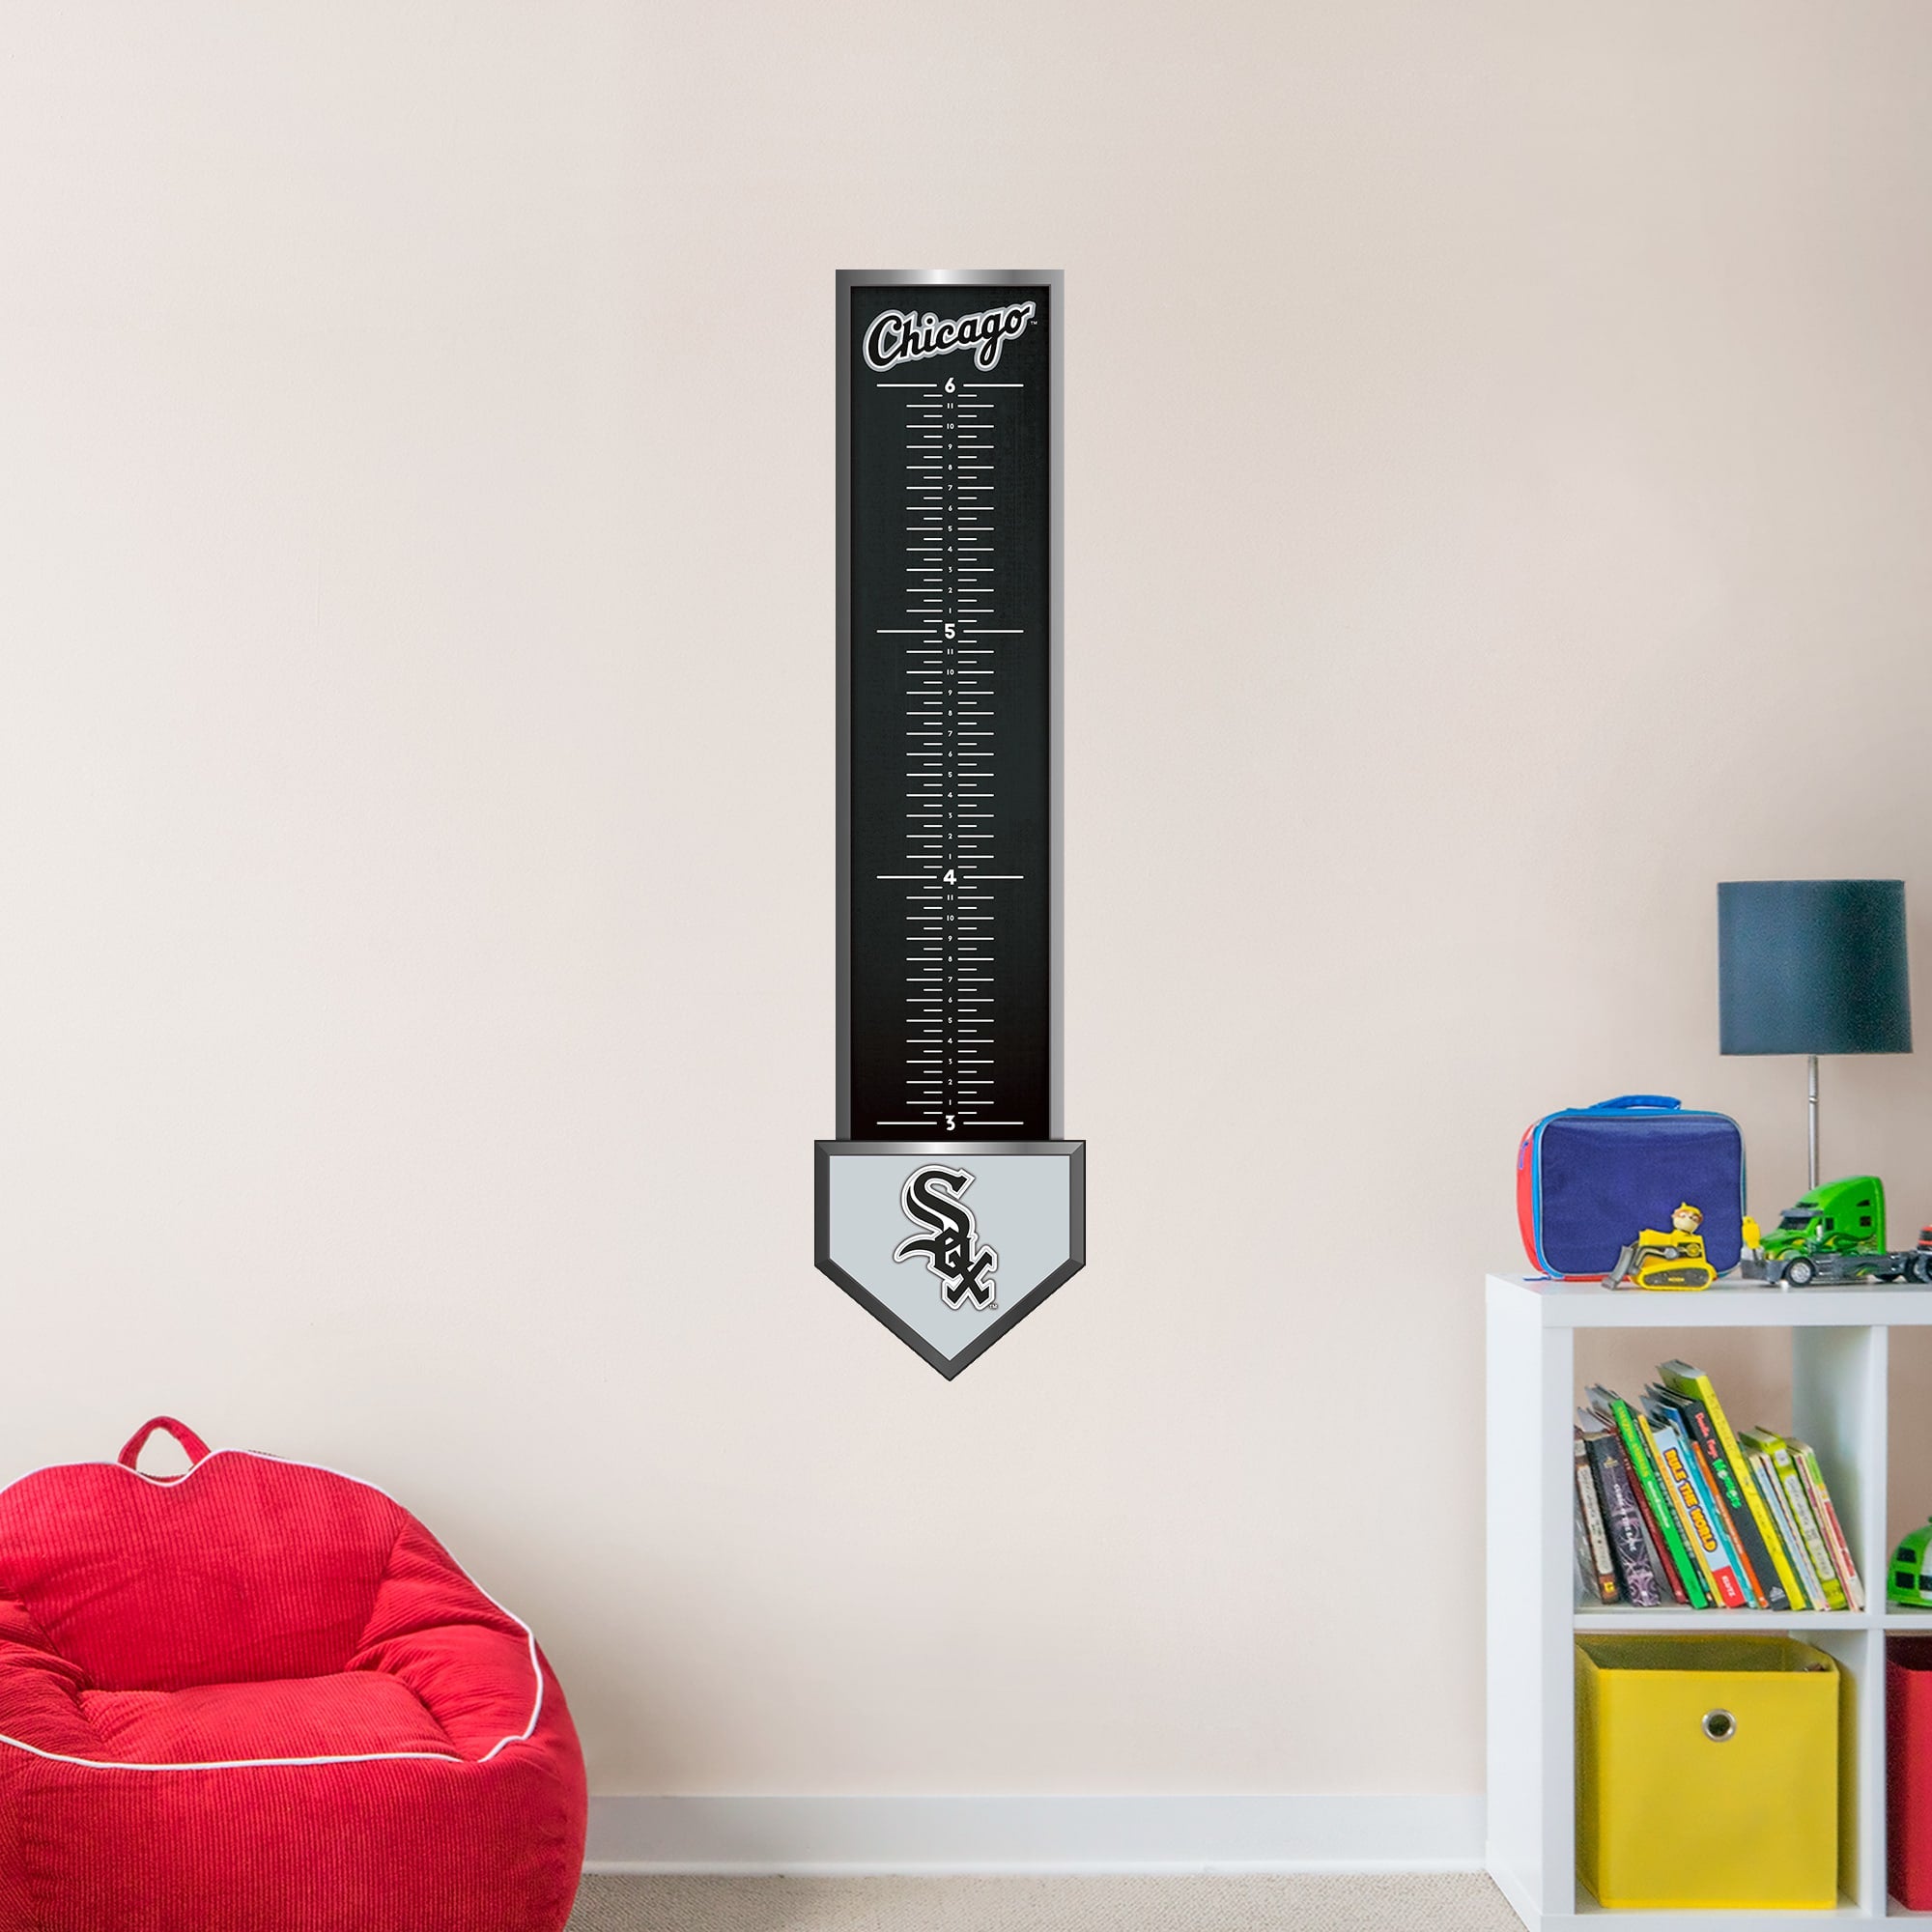 Chicago White Sox: Growth Chart - Officially Licensed MLB Removable Wall Graphic 13.0"W x 54.0"H by Fathead | Vinyl